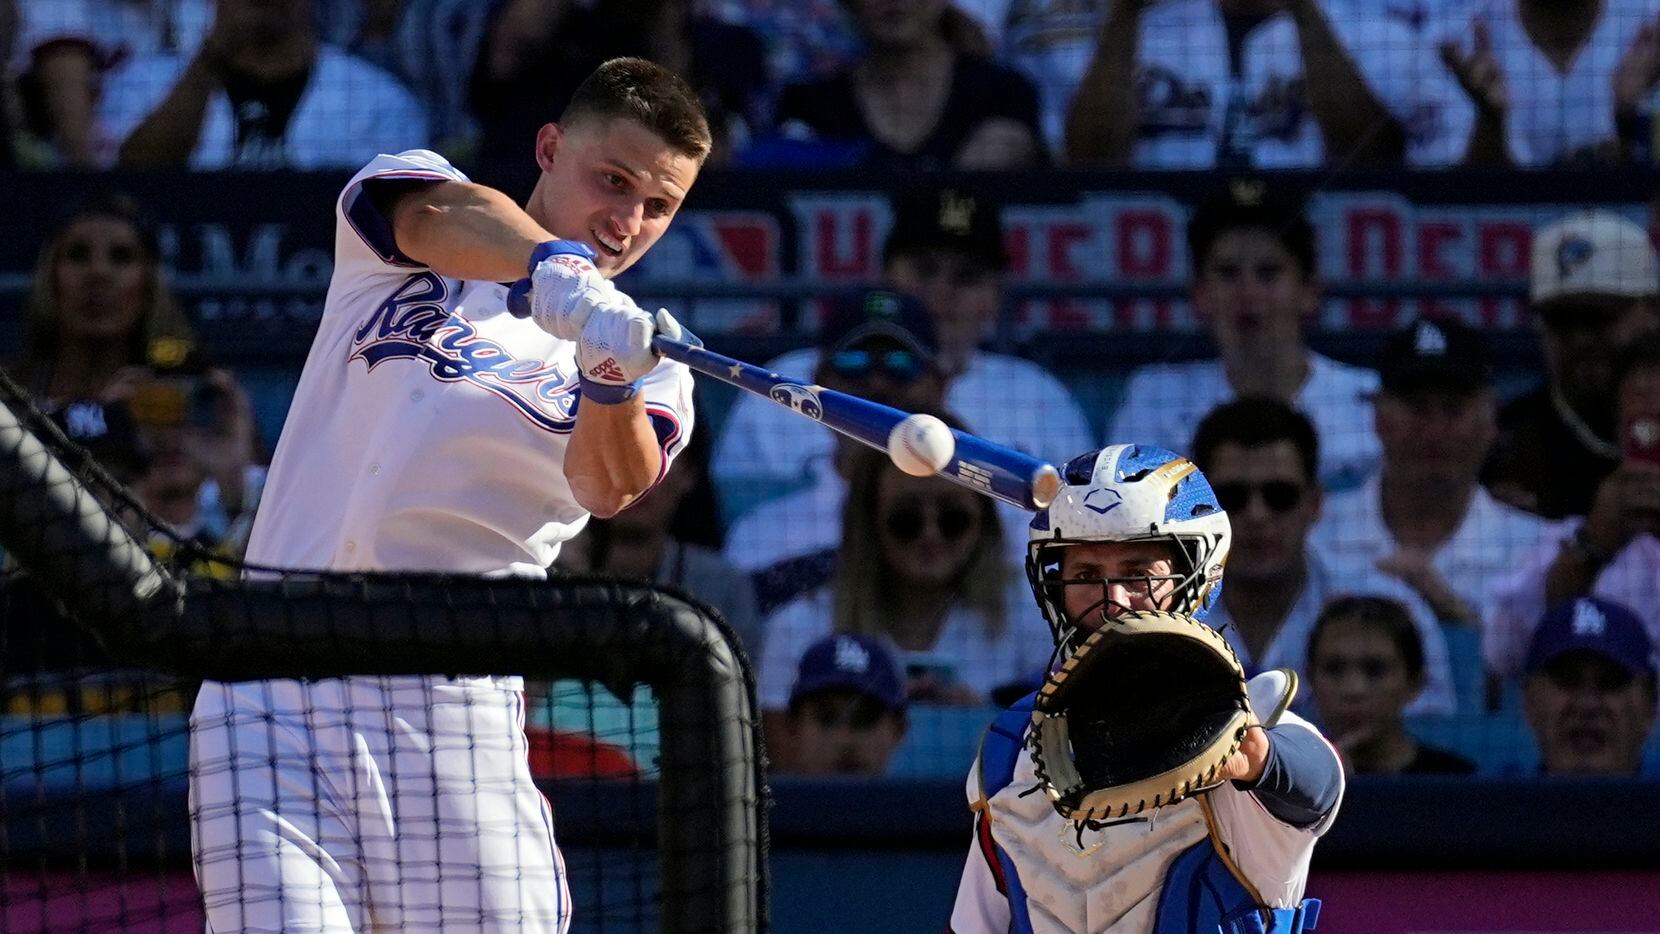 American League's Corey Seager, of the Texas Rangers, bats during the MLB All-Star baseball...